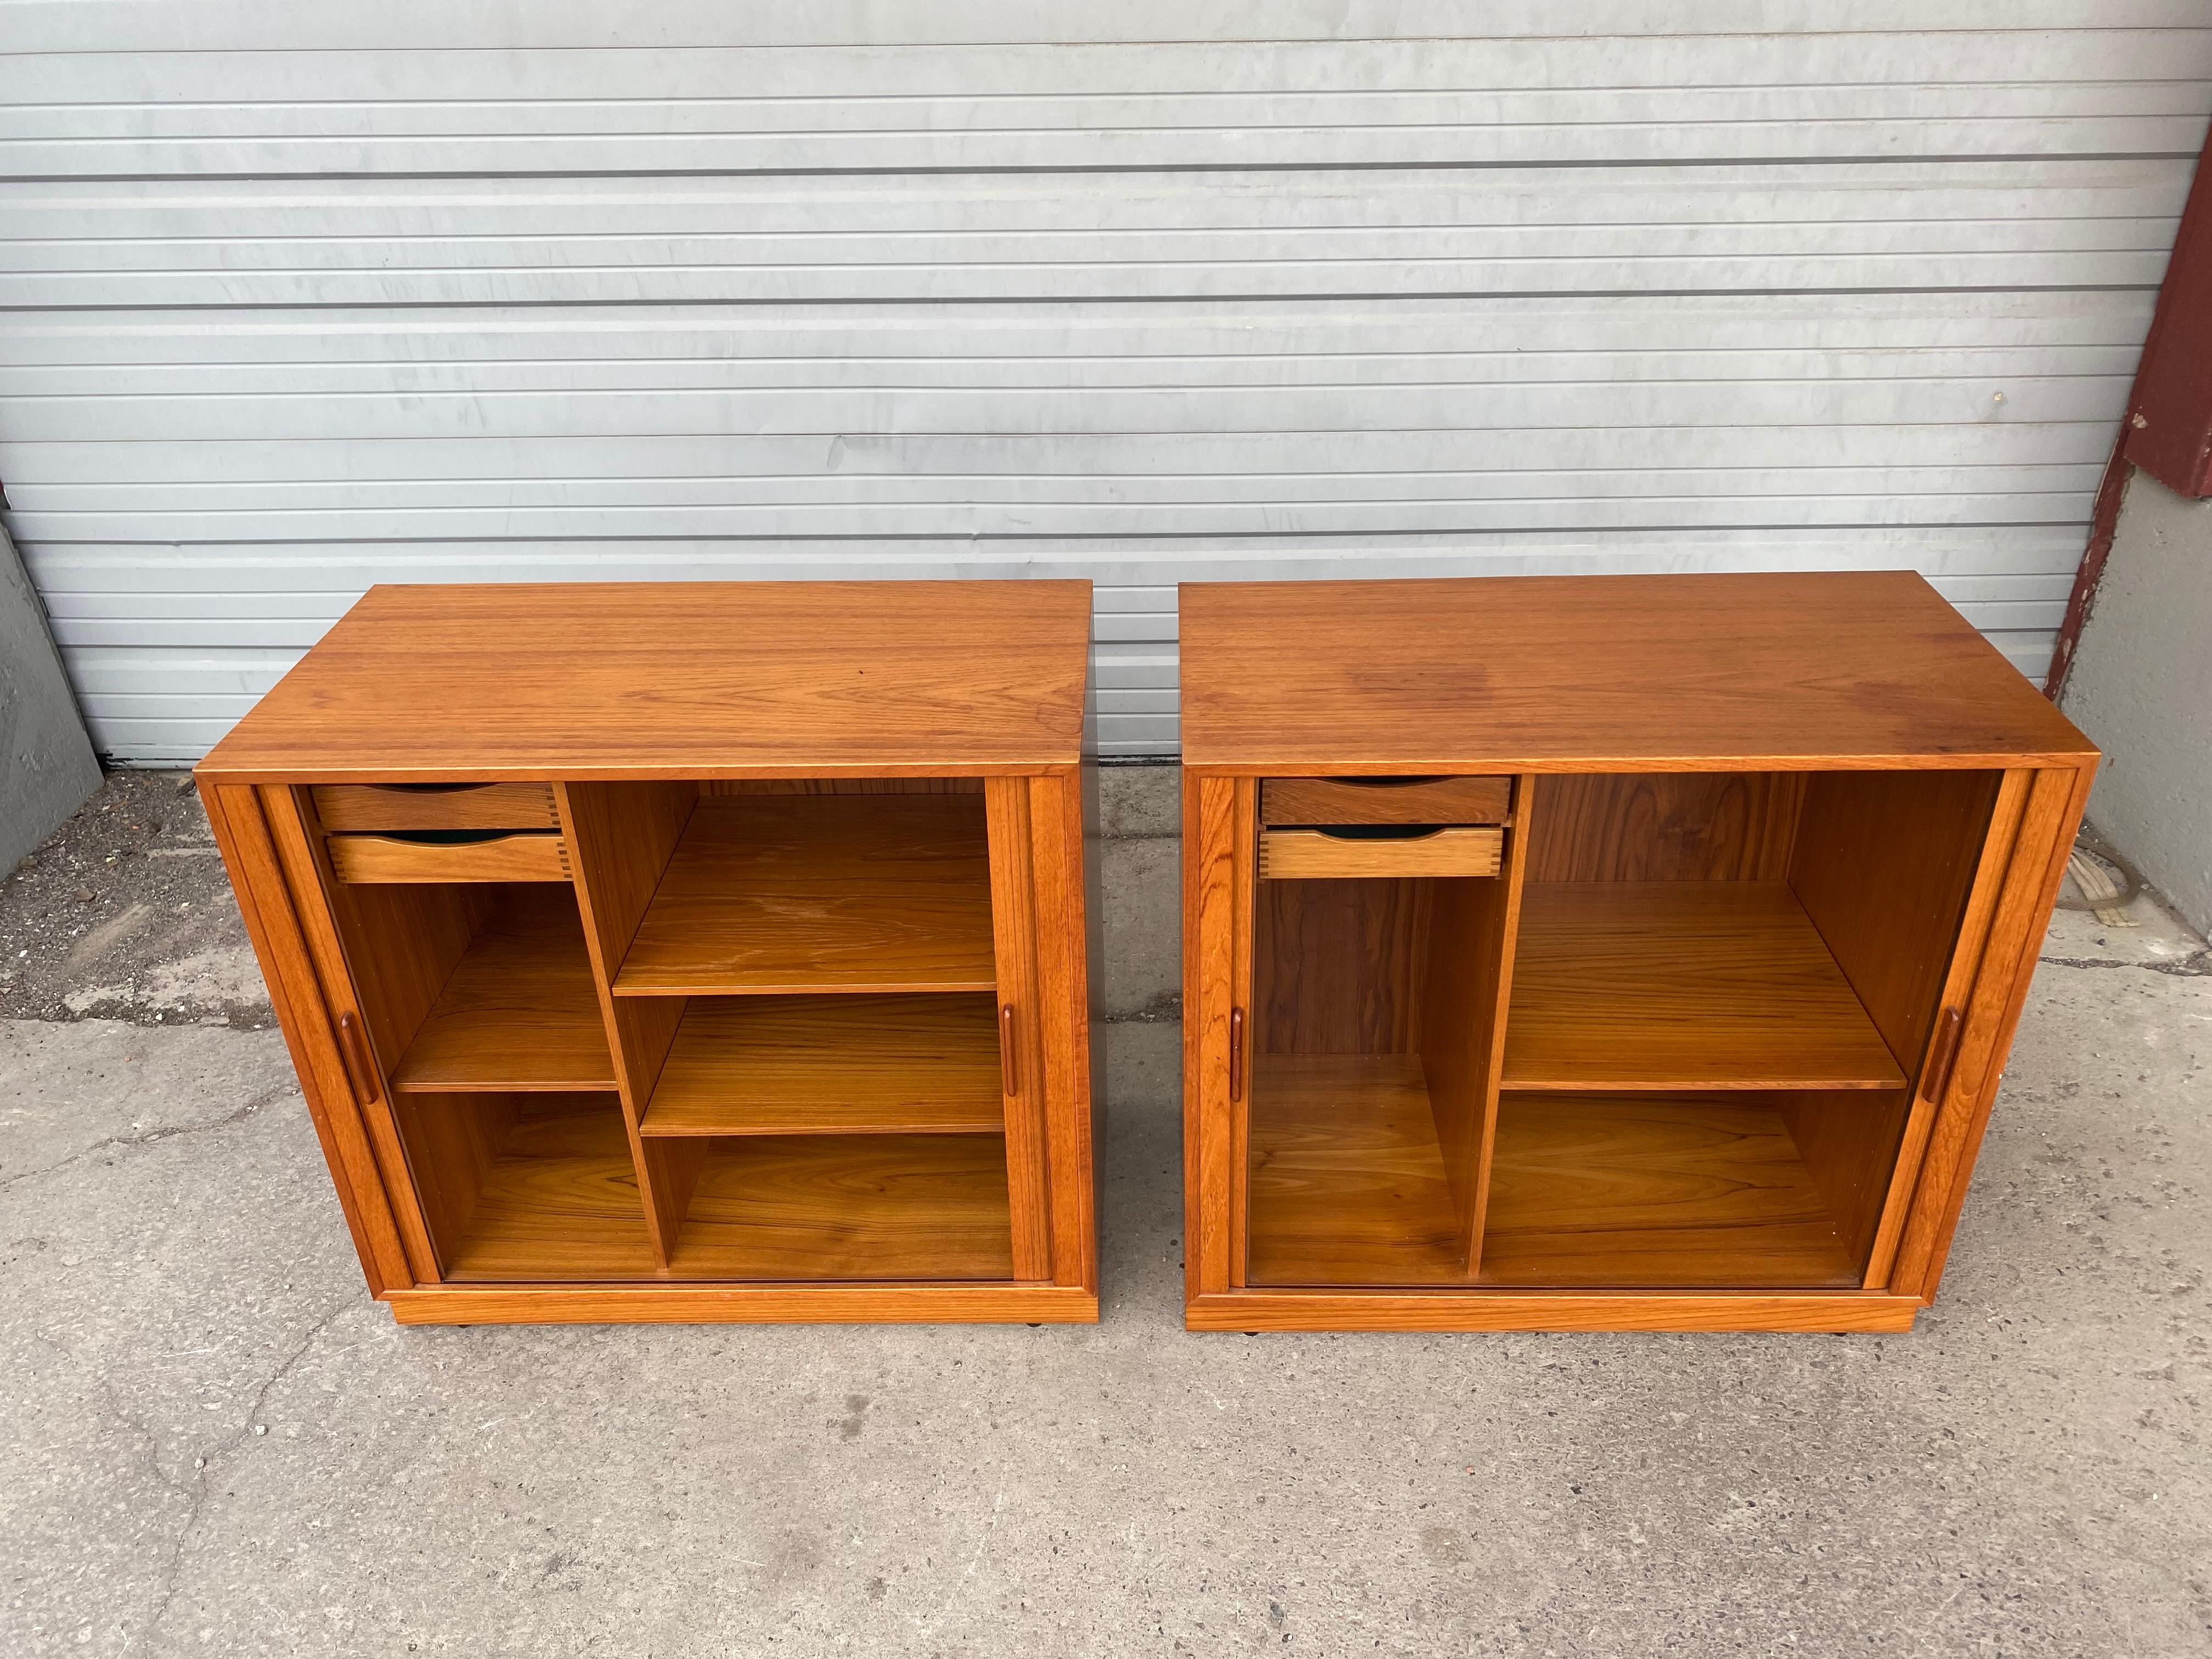 Mid-20th Century Matched Pair Teak Tambour Door Cabinets / Servers Made in Denmark For Sale